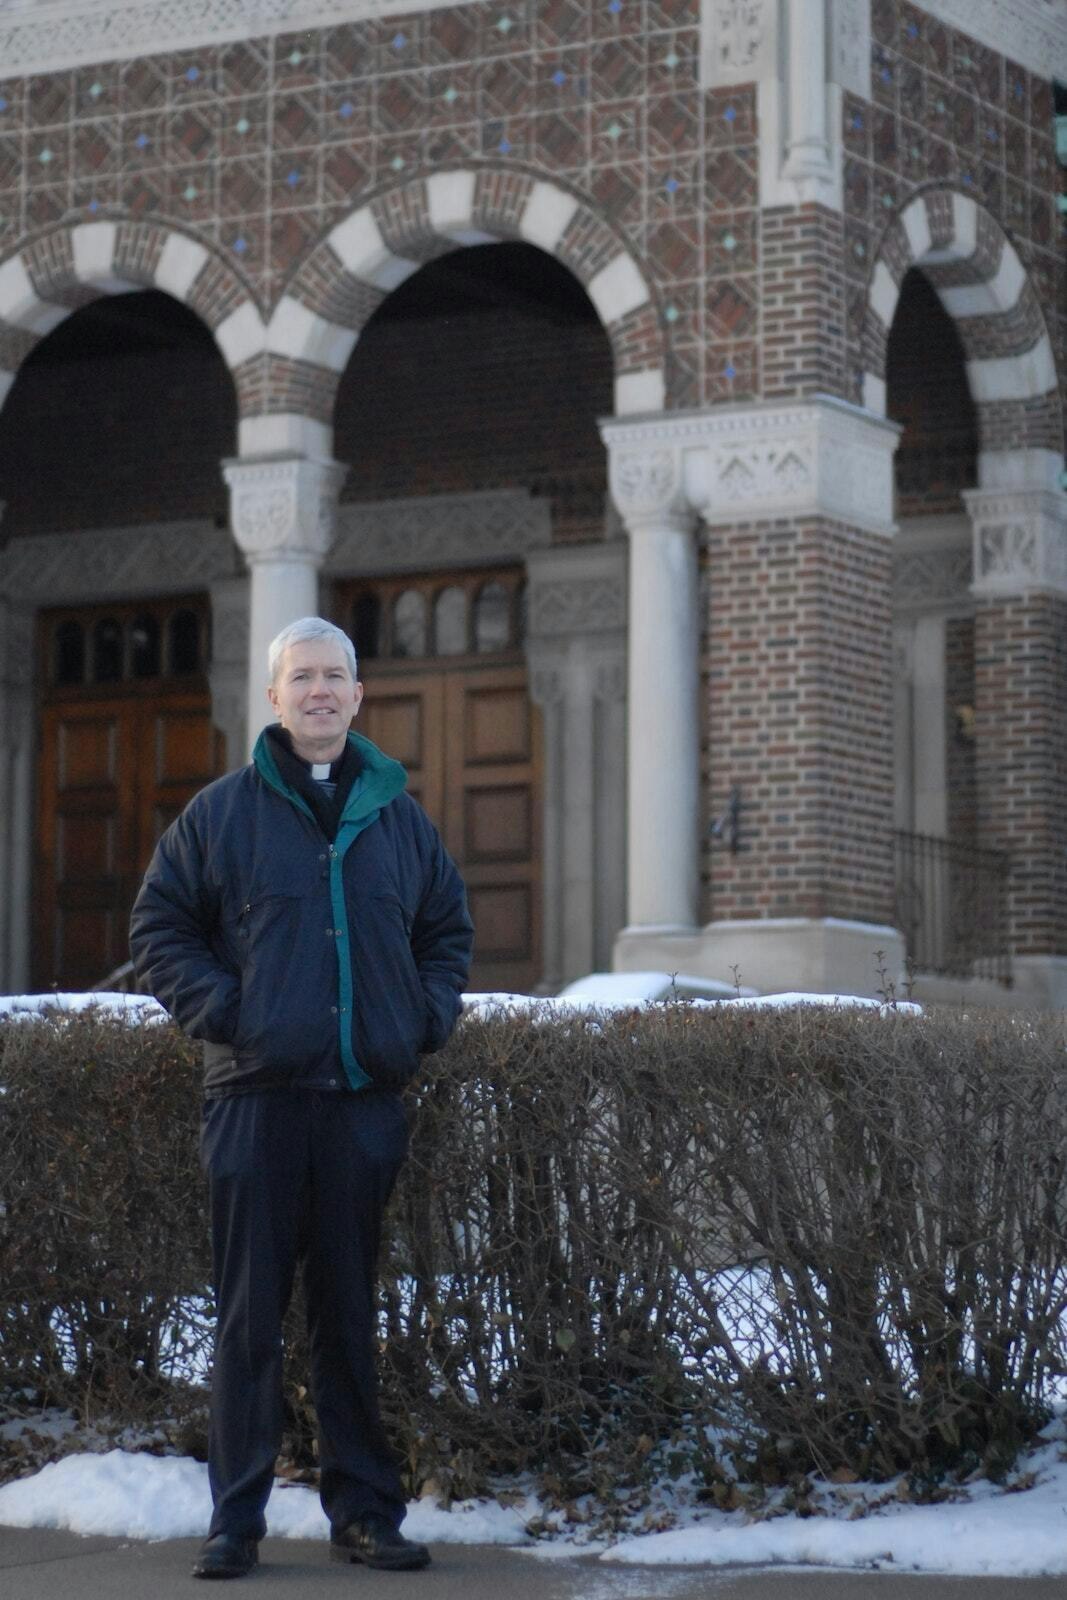 Msgr. Trapp stands in front of St. Augustine and St. Monica Parish on Detroit's east side in 2016. Under Msgr. Trapp's leadership, the parish organized a neighborhood association once a month to help residents build a sense of community and connection with the parish, as well as provide a host of services to those in need. (Michael Stechschulte | Detroit Catholic)